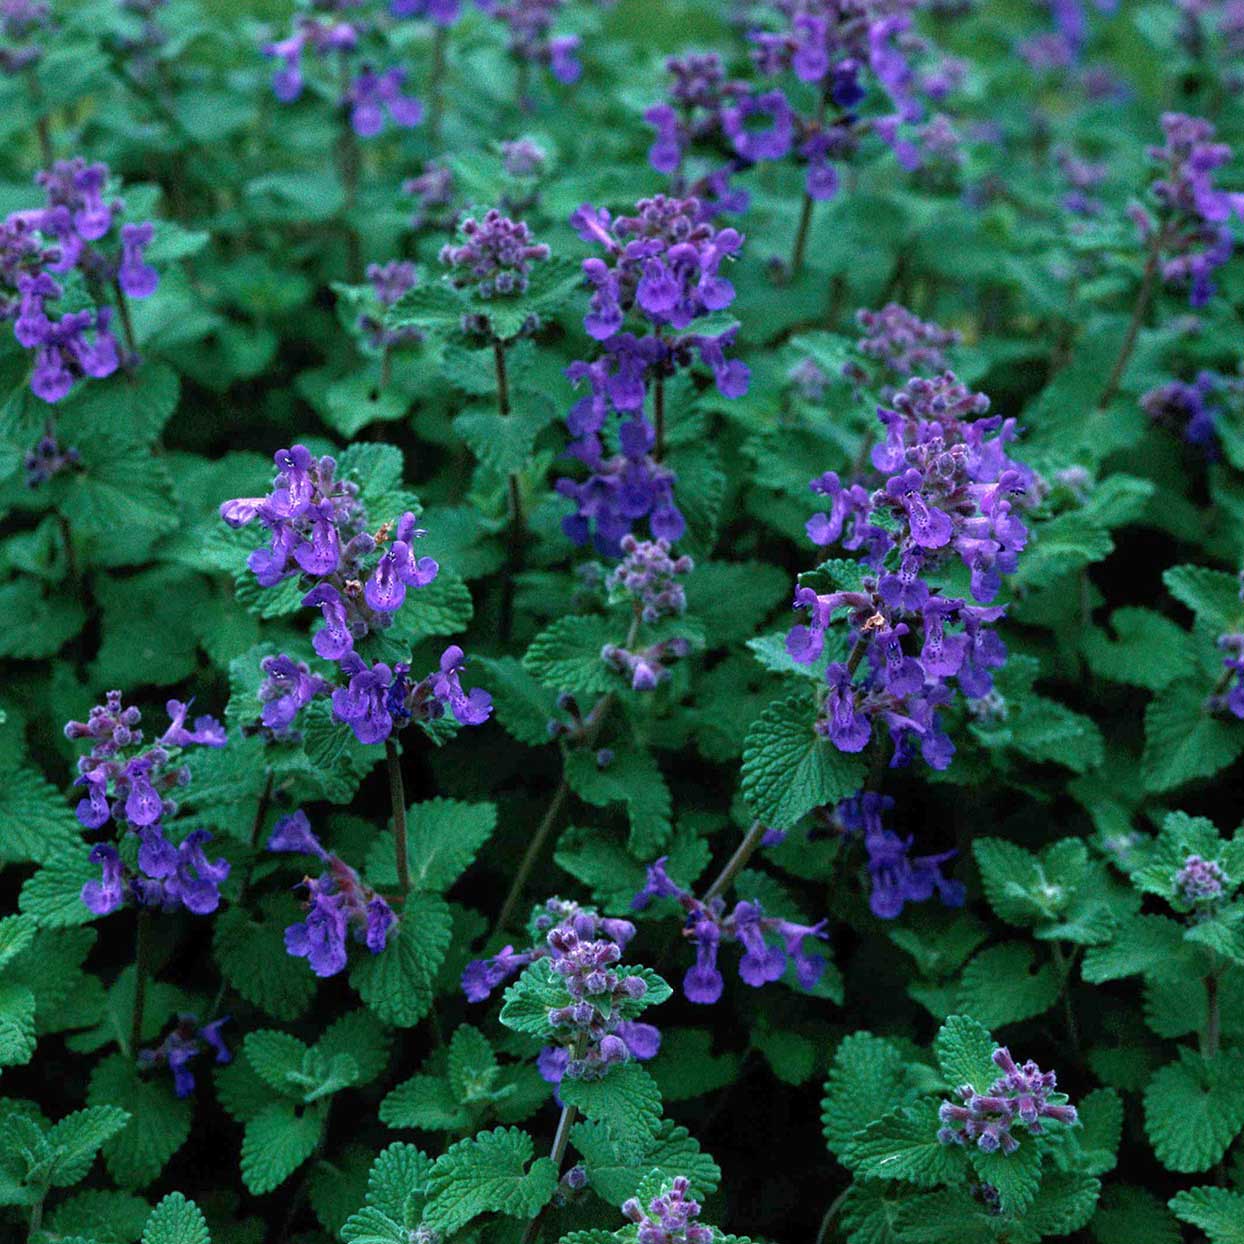 Nepeta 'Blue Wonder' is a variety of Catmint. The foliage is grey-green, 1"-2" long, scalloped and fragrant. Nepeta 'Blue Wonder' is covered in sprays of 6" tall, dark blue-purple flower spikes beginning late Spring and into the Fall